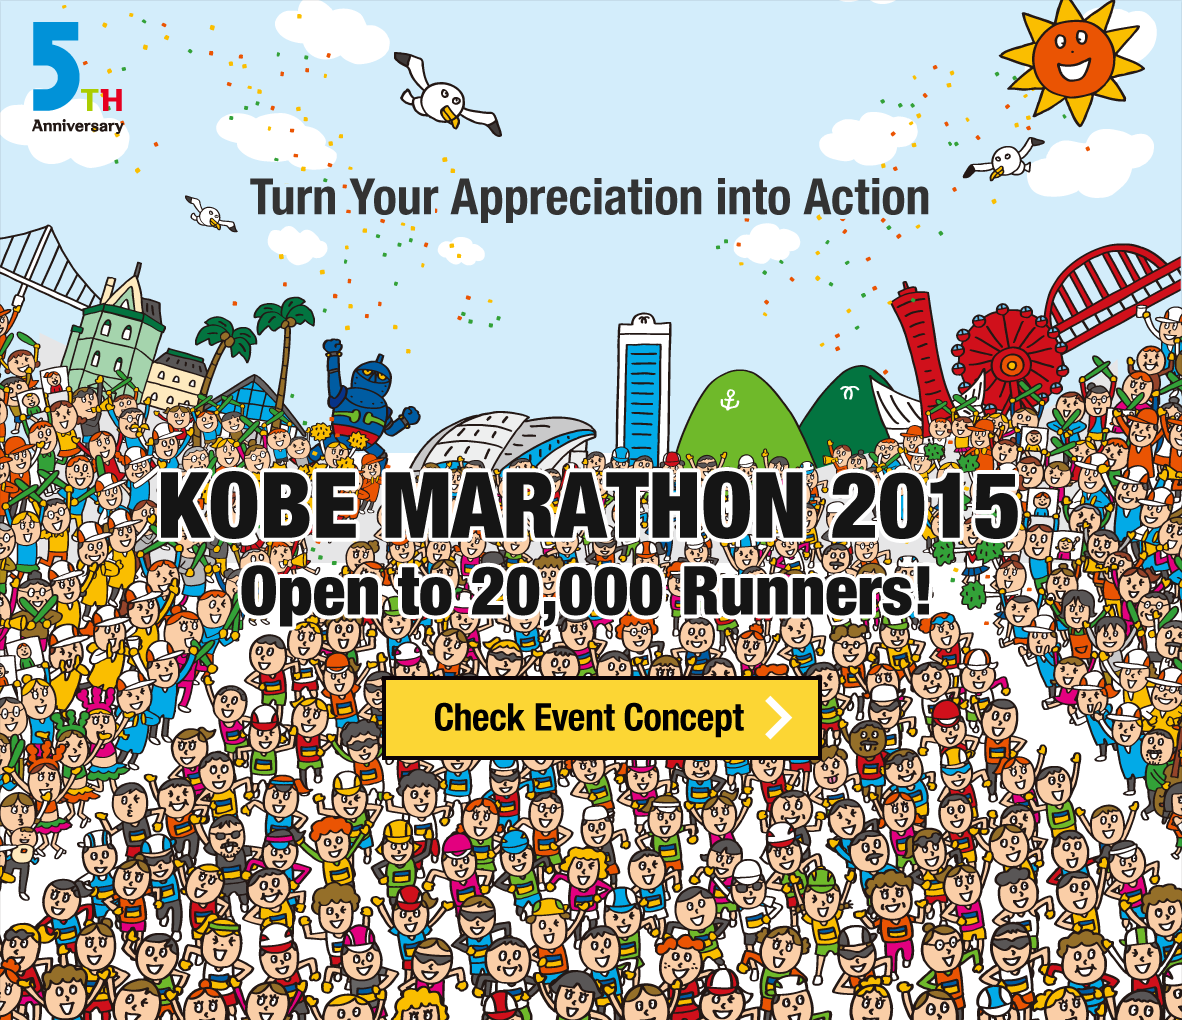 Turn Your Appreciation into Action | Kobe Marathon 2015 | Open to 20,000 Runners!